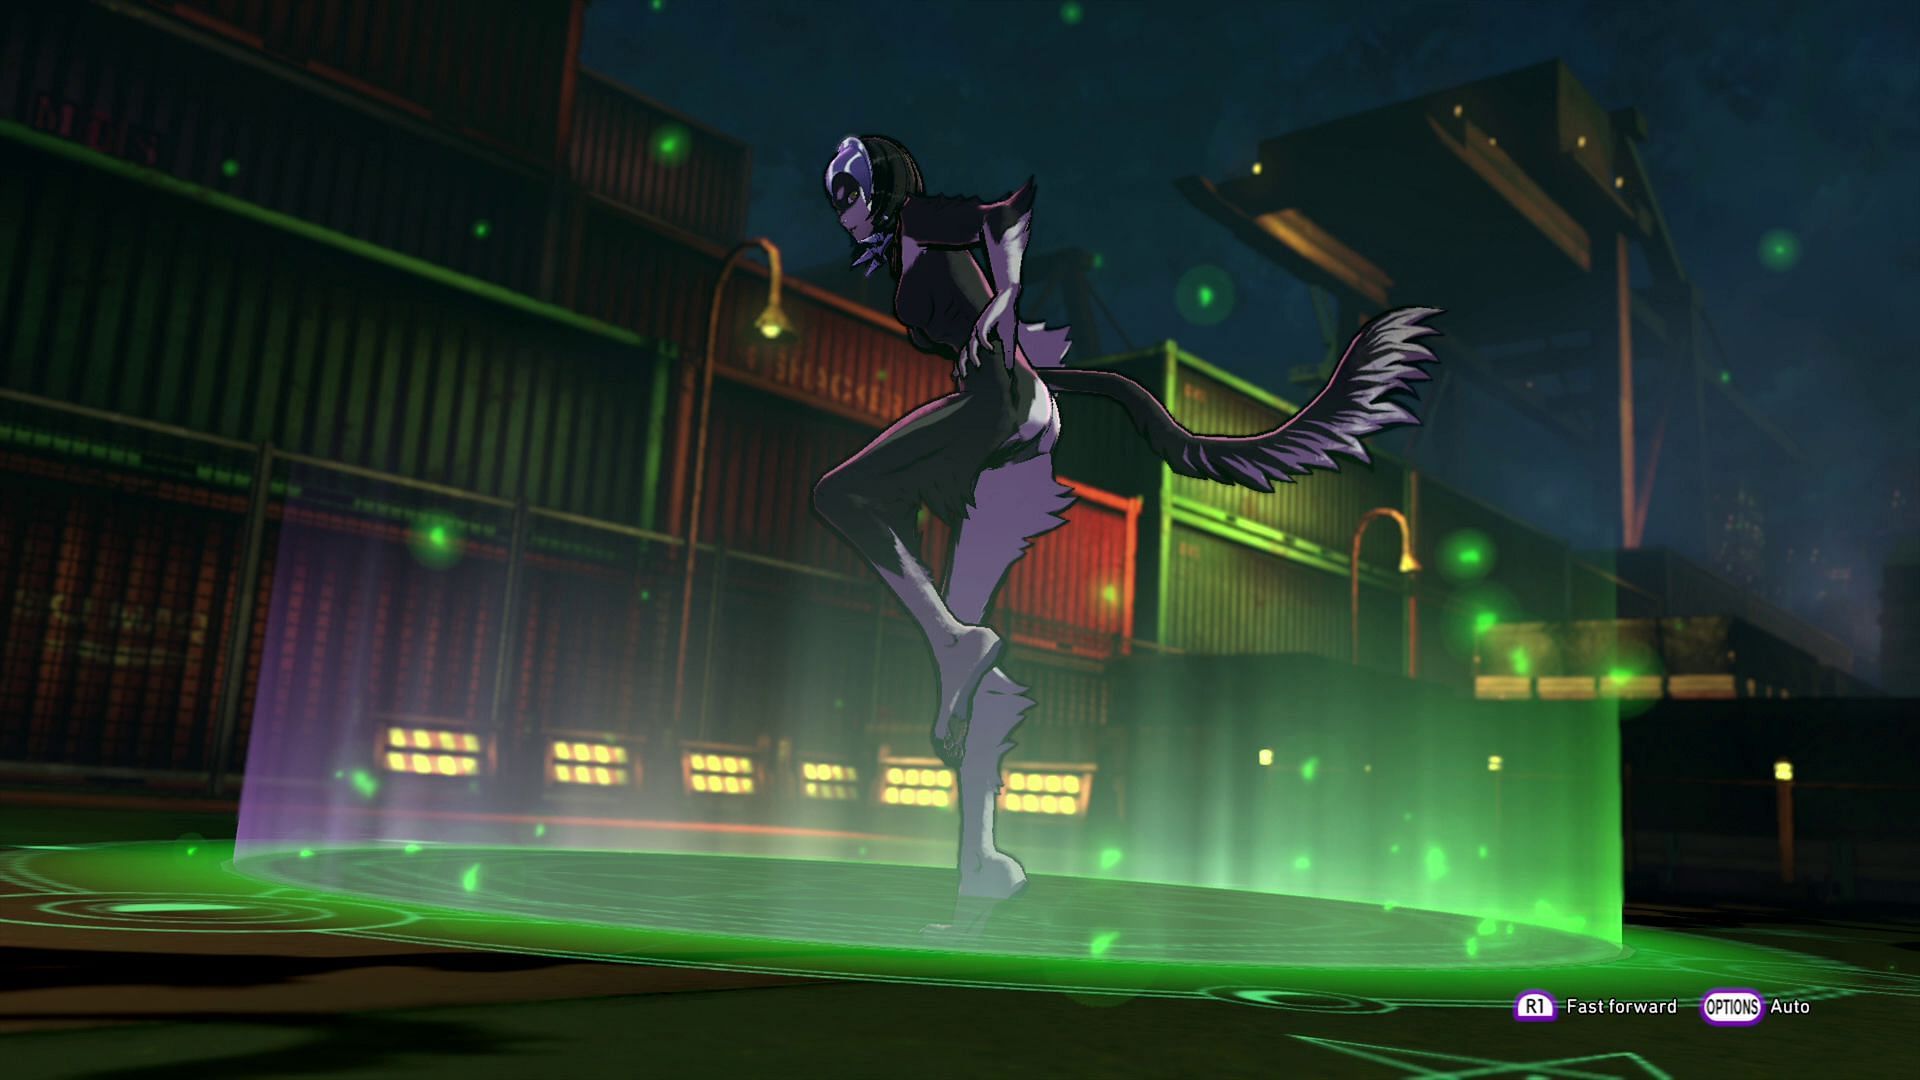 Quite a few familiar demons are going to appear again in Soul Hackers 2 (Image via Atlus)